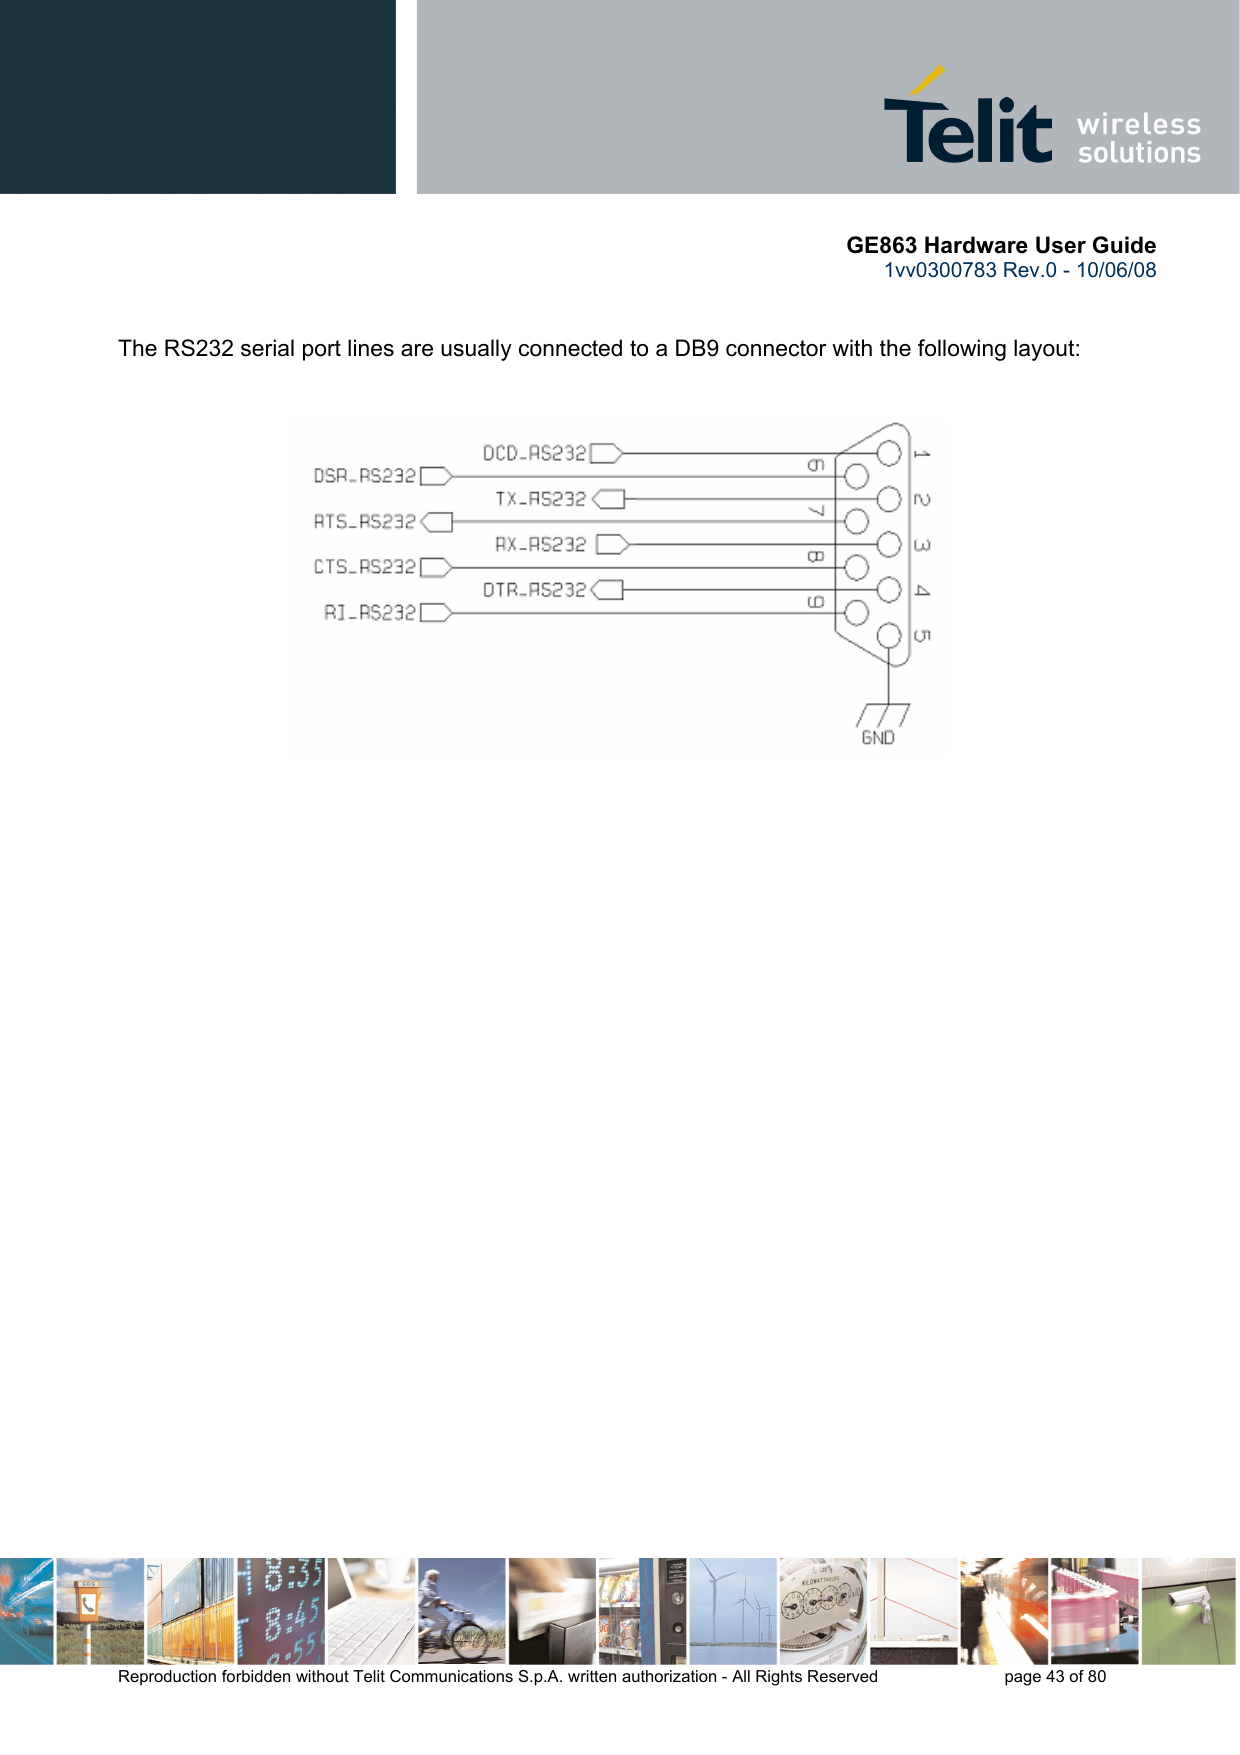       GE863 Hardware User Guide 1vv0300783 Rev.0 - 10/06/08 Reproduction forbidden without Telit Communications S.p.A. written authorization - All Rights Reserved    page 43 of 80    The RS232 serial port lines are usually connected to a DB9 connector with the following layout:   